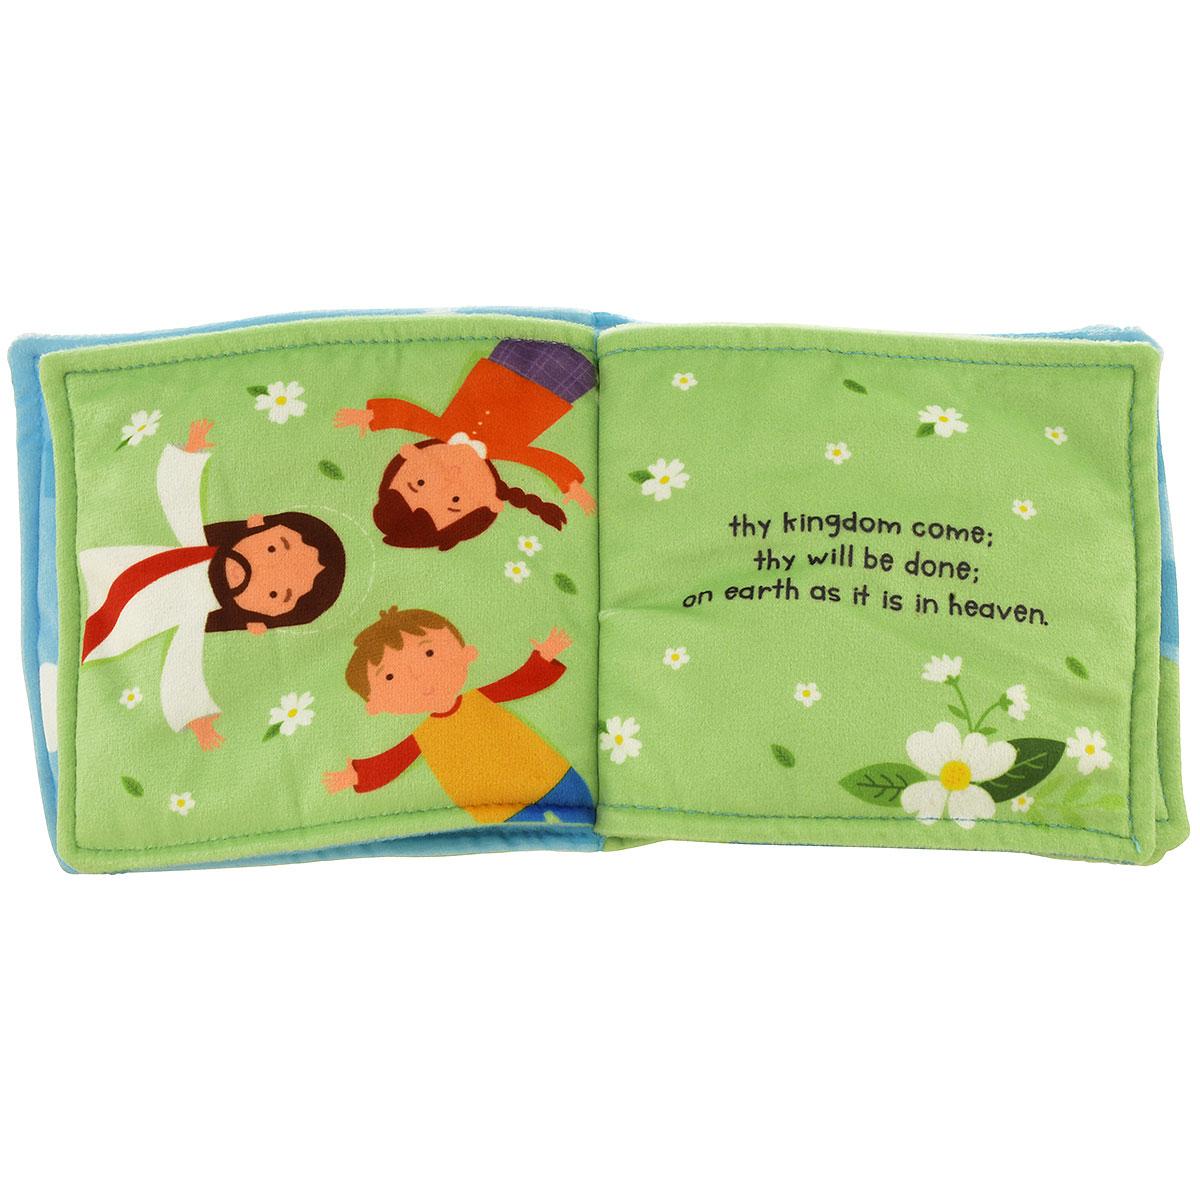 The Lord's Prayer Soft Baby Book